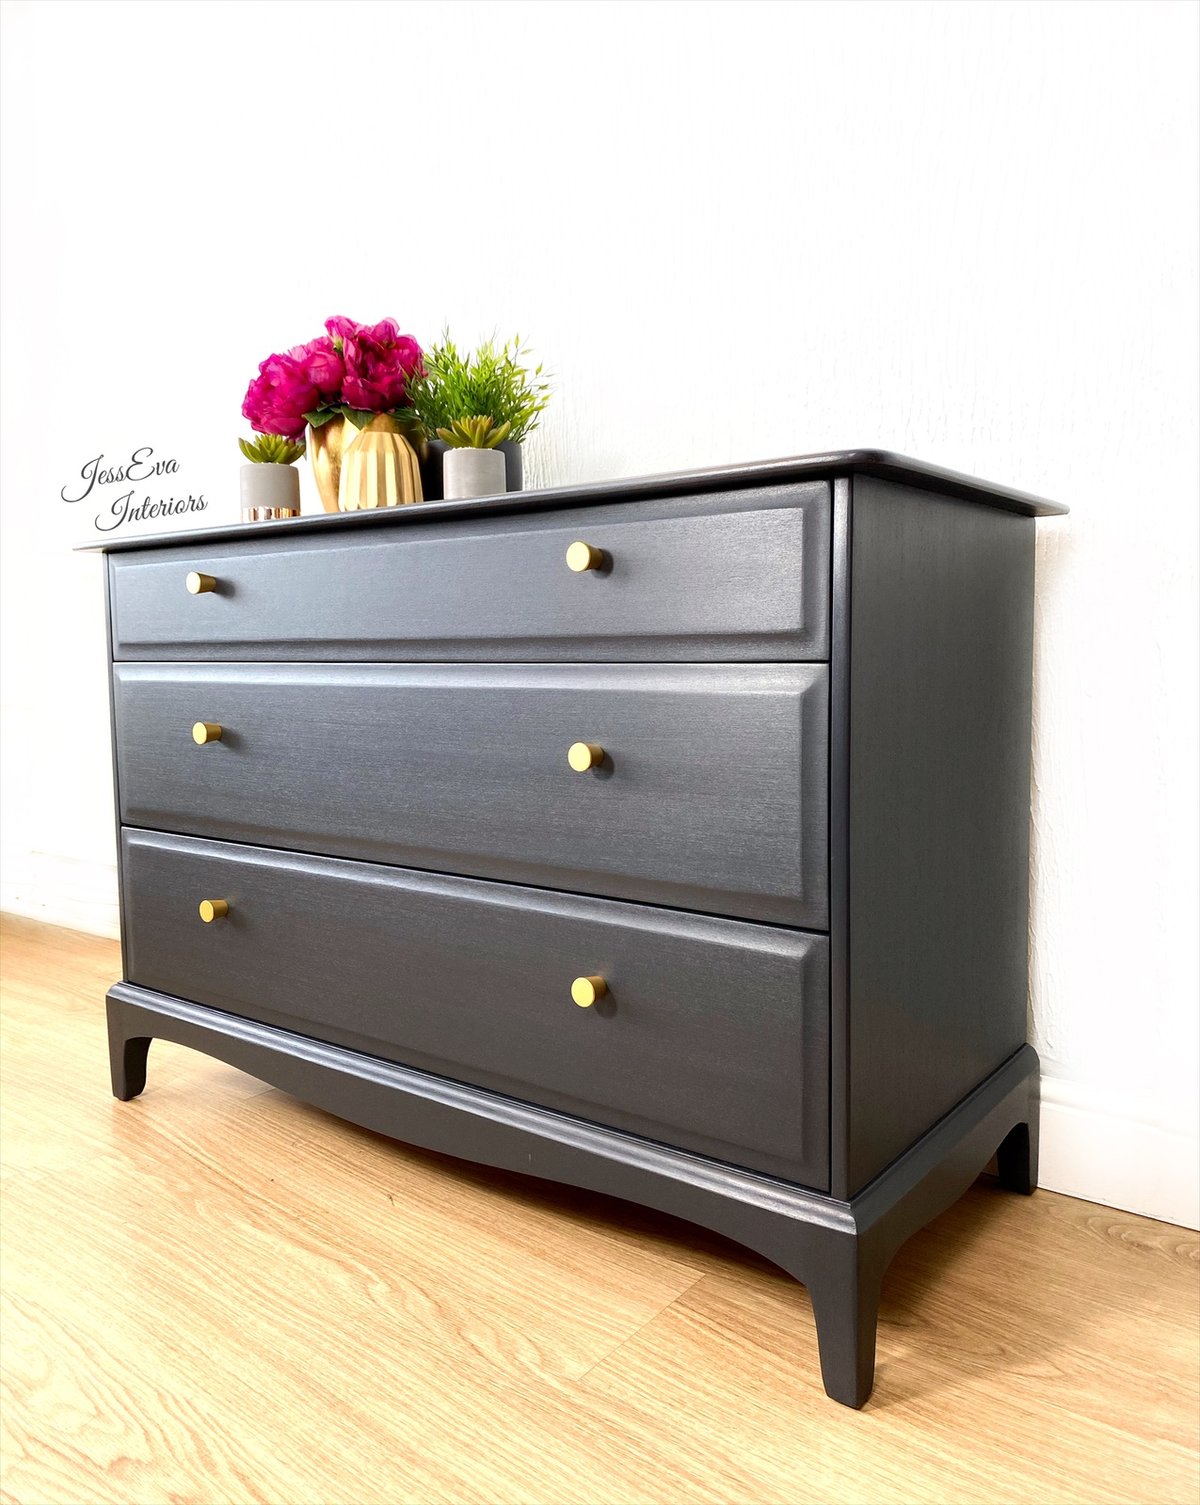 Stag Minstrel CHEST OF DRAWERS professionally painted in Fusion Ash - dark grey